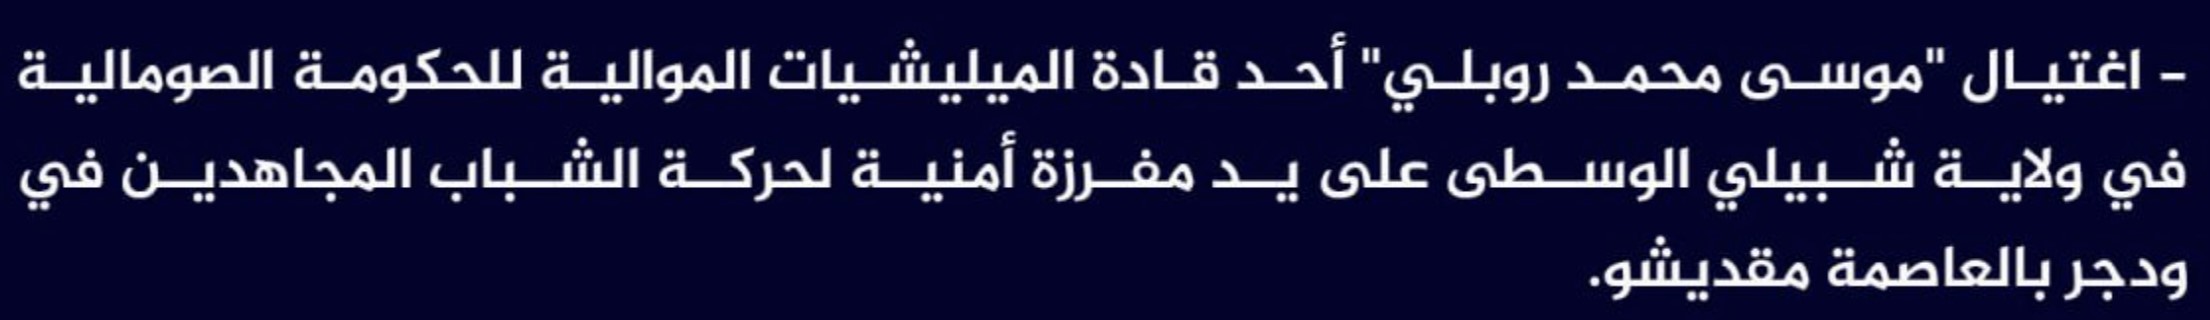 (Claim) al-Shabaab Assassinated a Somalian Forces Official Named Moussa Muhammad Roubli in Middle Shabelle by an al-Shabaab Faction That Operates in Wadajir, Mogadishu, Somalia - 17 May 2023